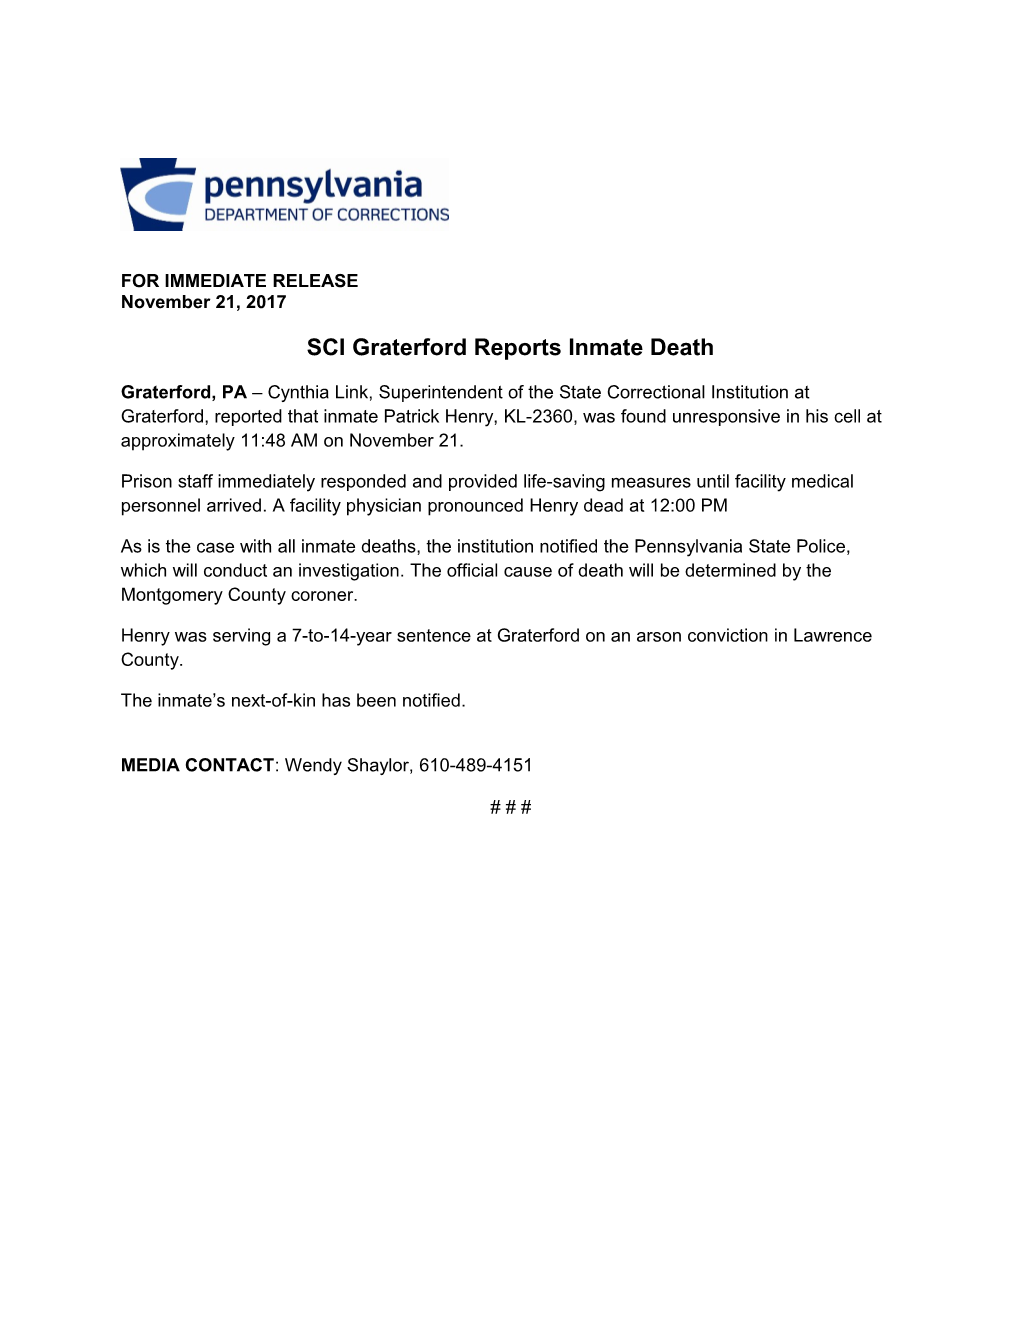 SCI Graterford Reports Inmate Death